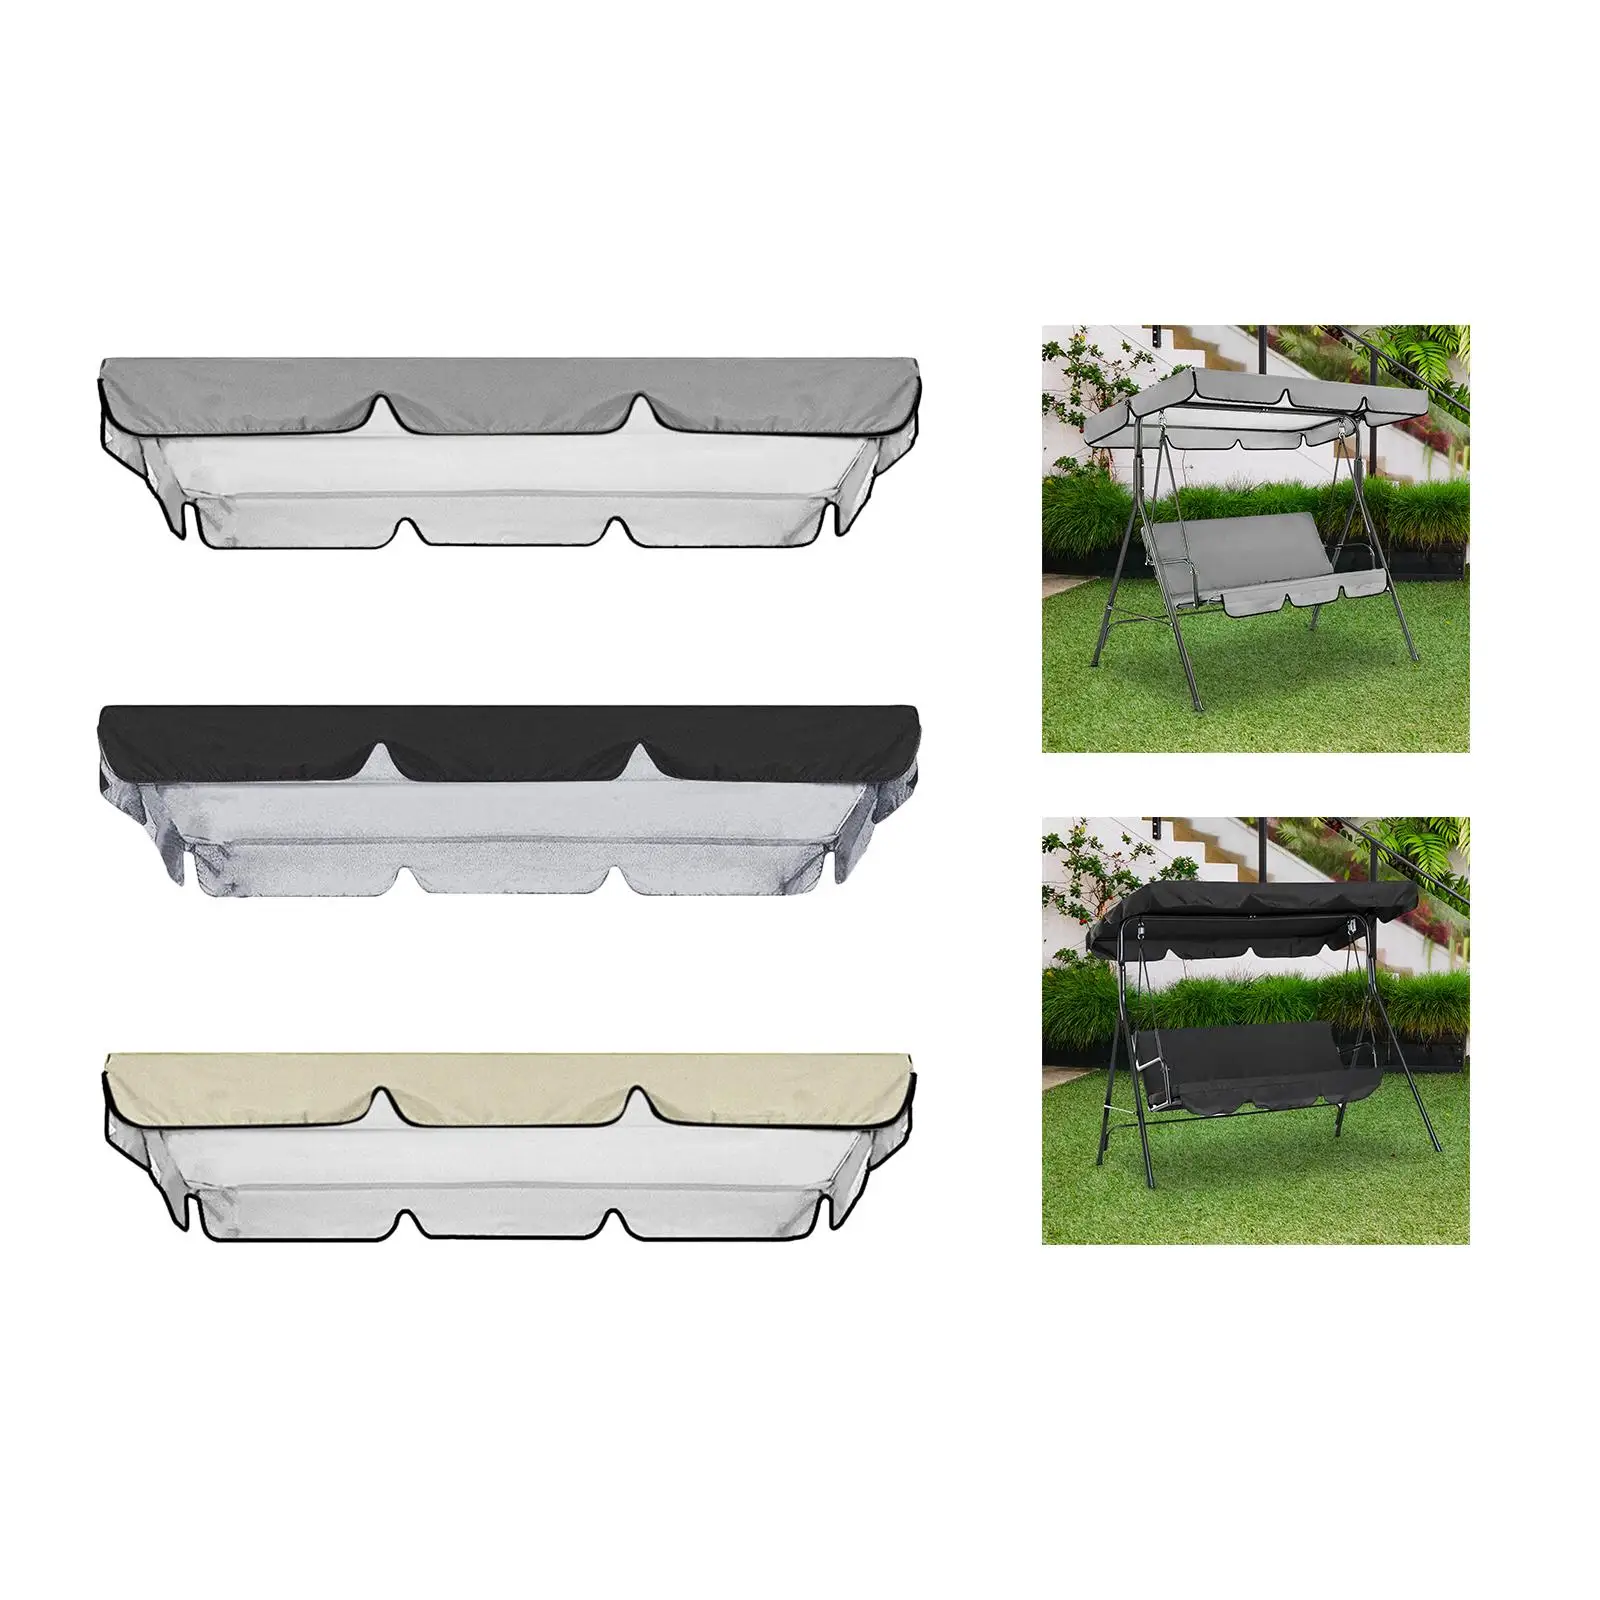 Swing Canopy Replacement Top Cover Oxford Easy to Install Swing Top Cover Swing Cover for Porch Garden Party Yard Patio Hammock